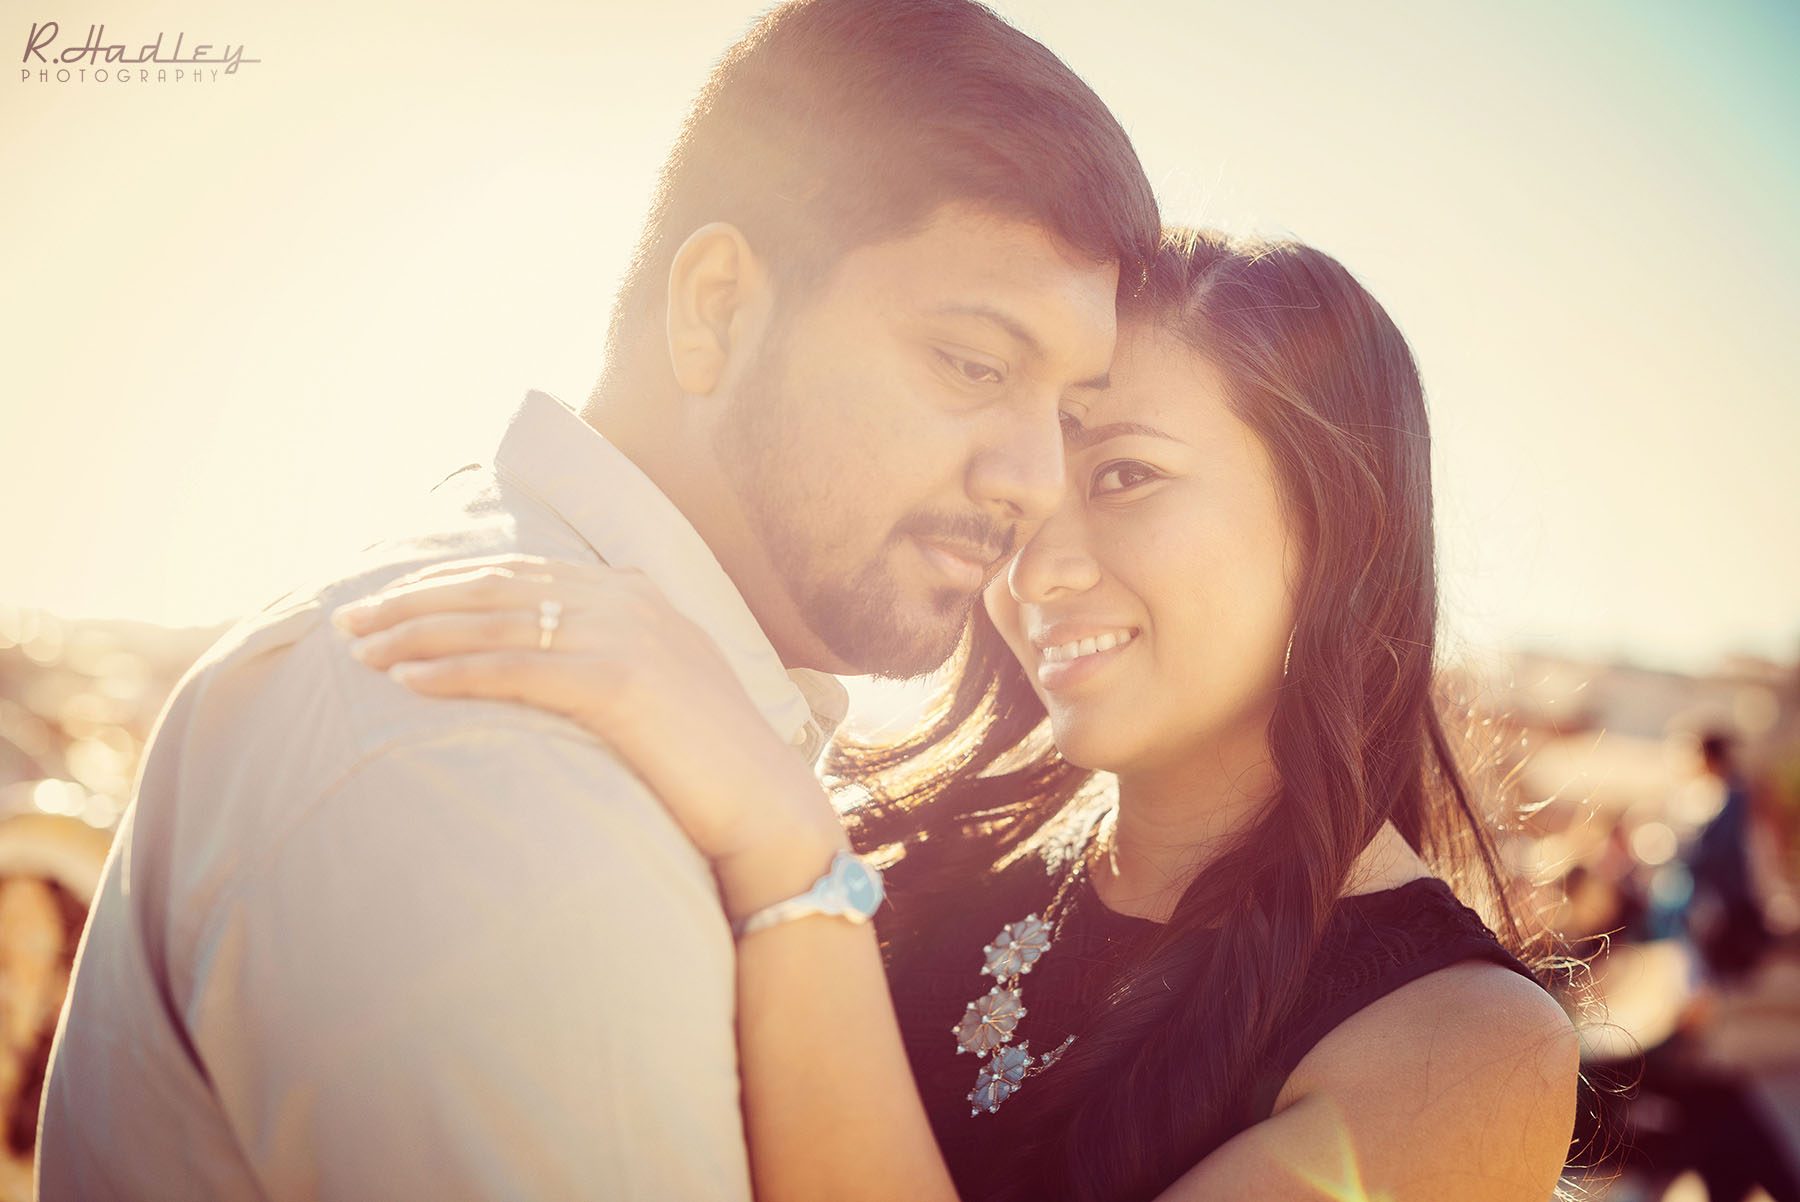 Engagement photo shoot in Park Guell, Barcelona